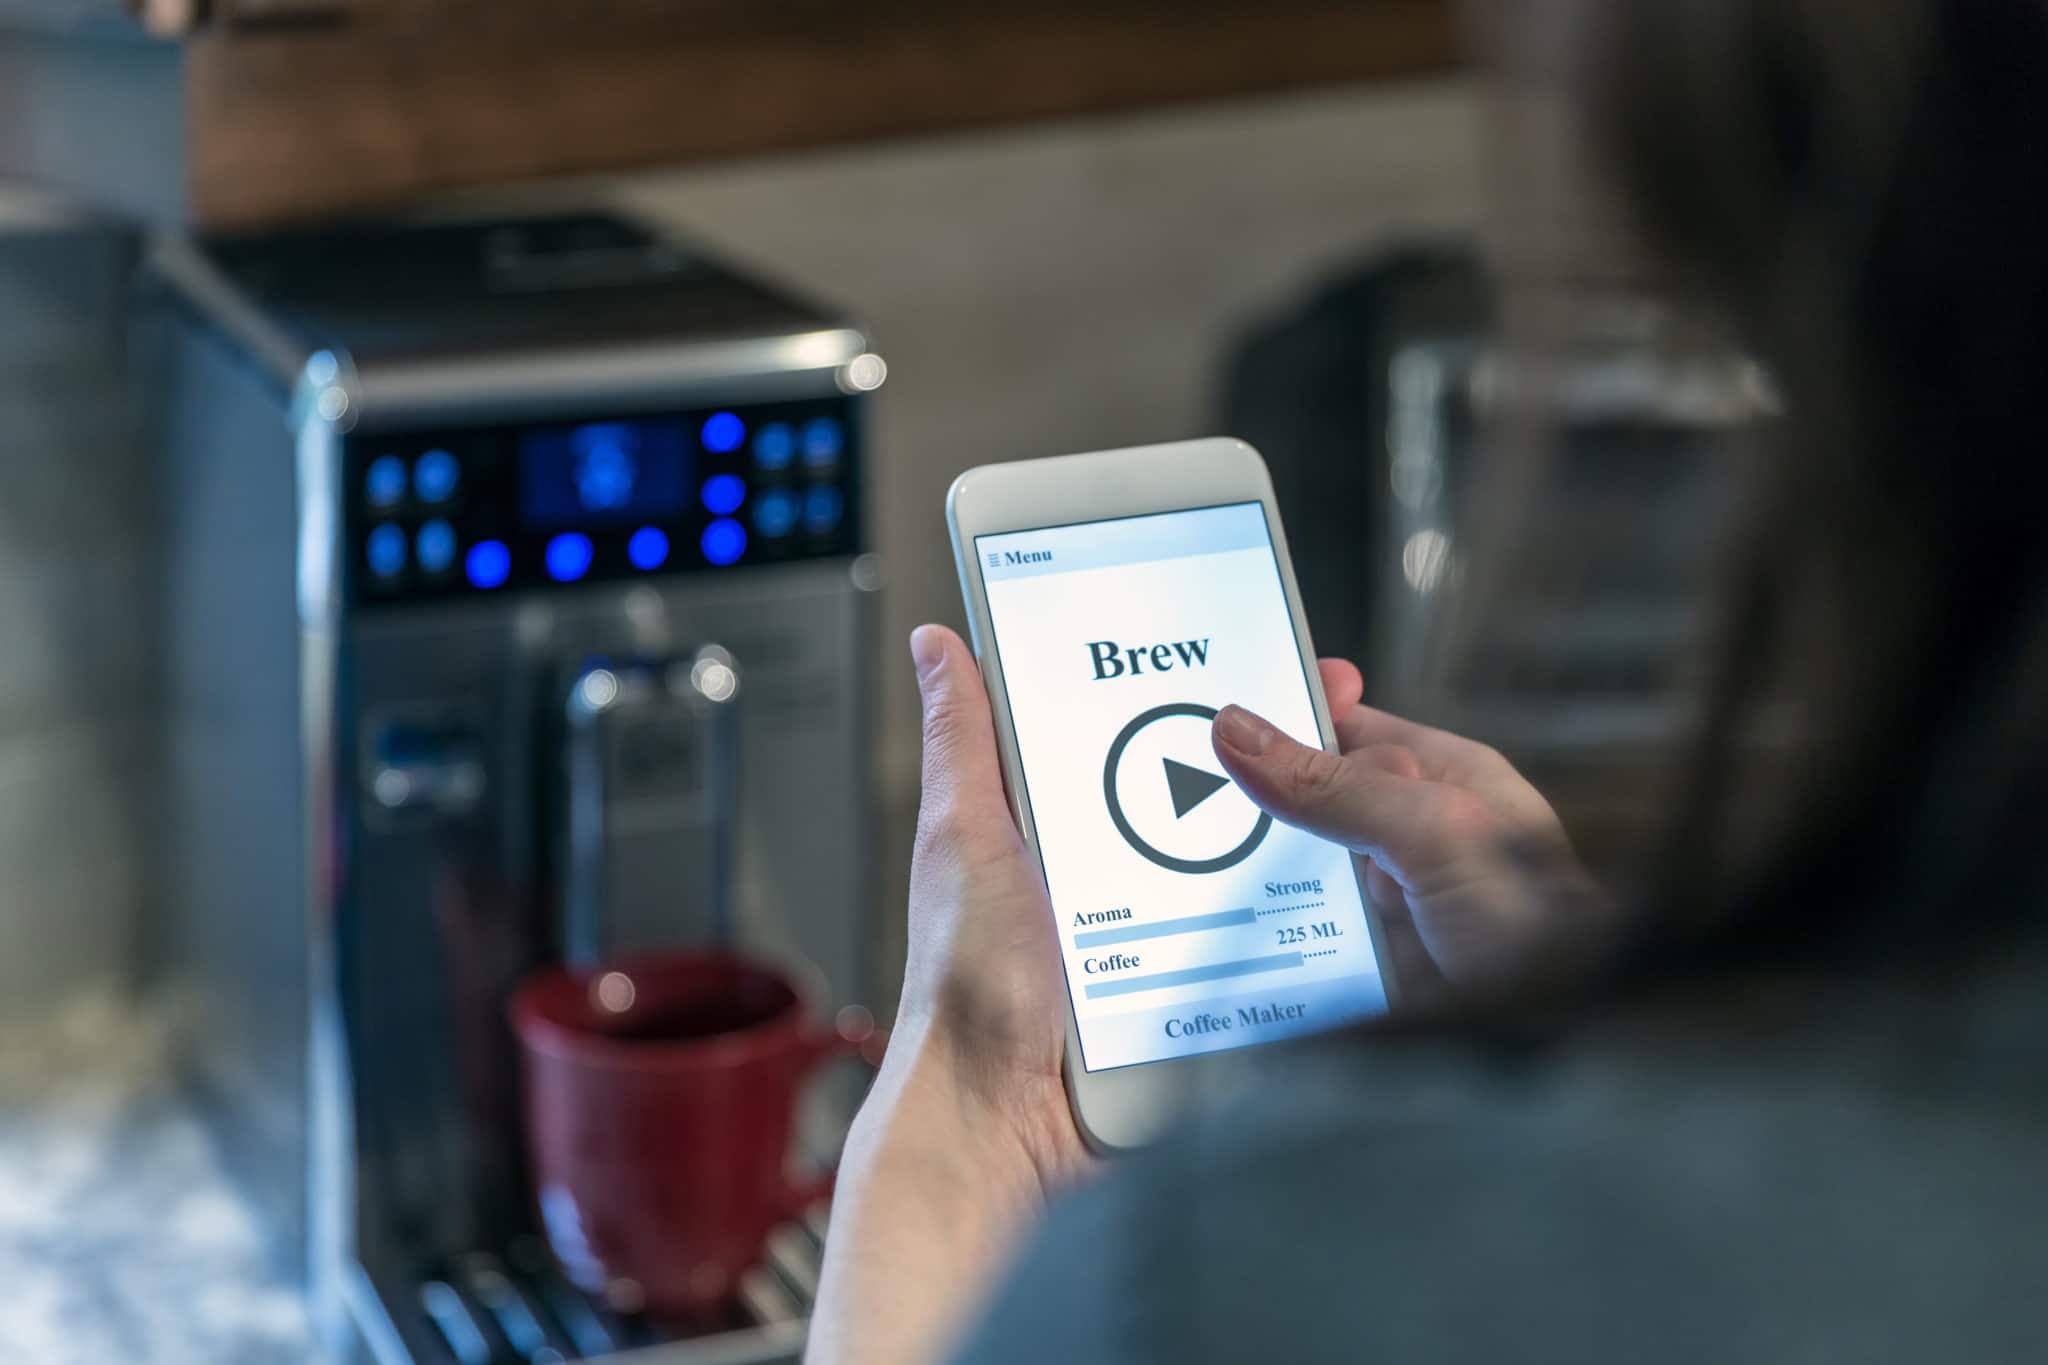 6 Smart Kitchen Appliances to Add to Your Home